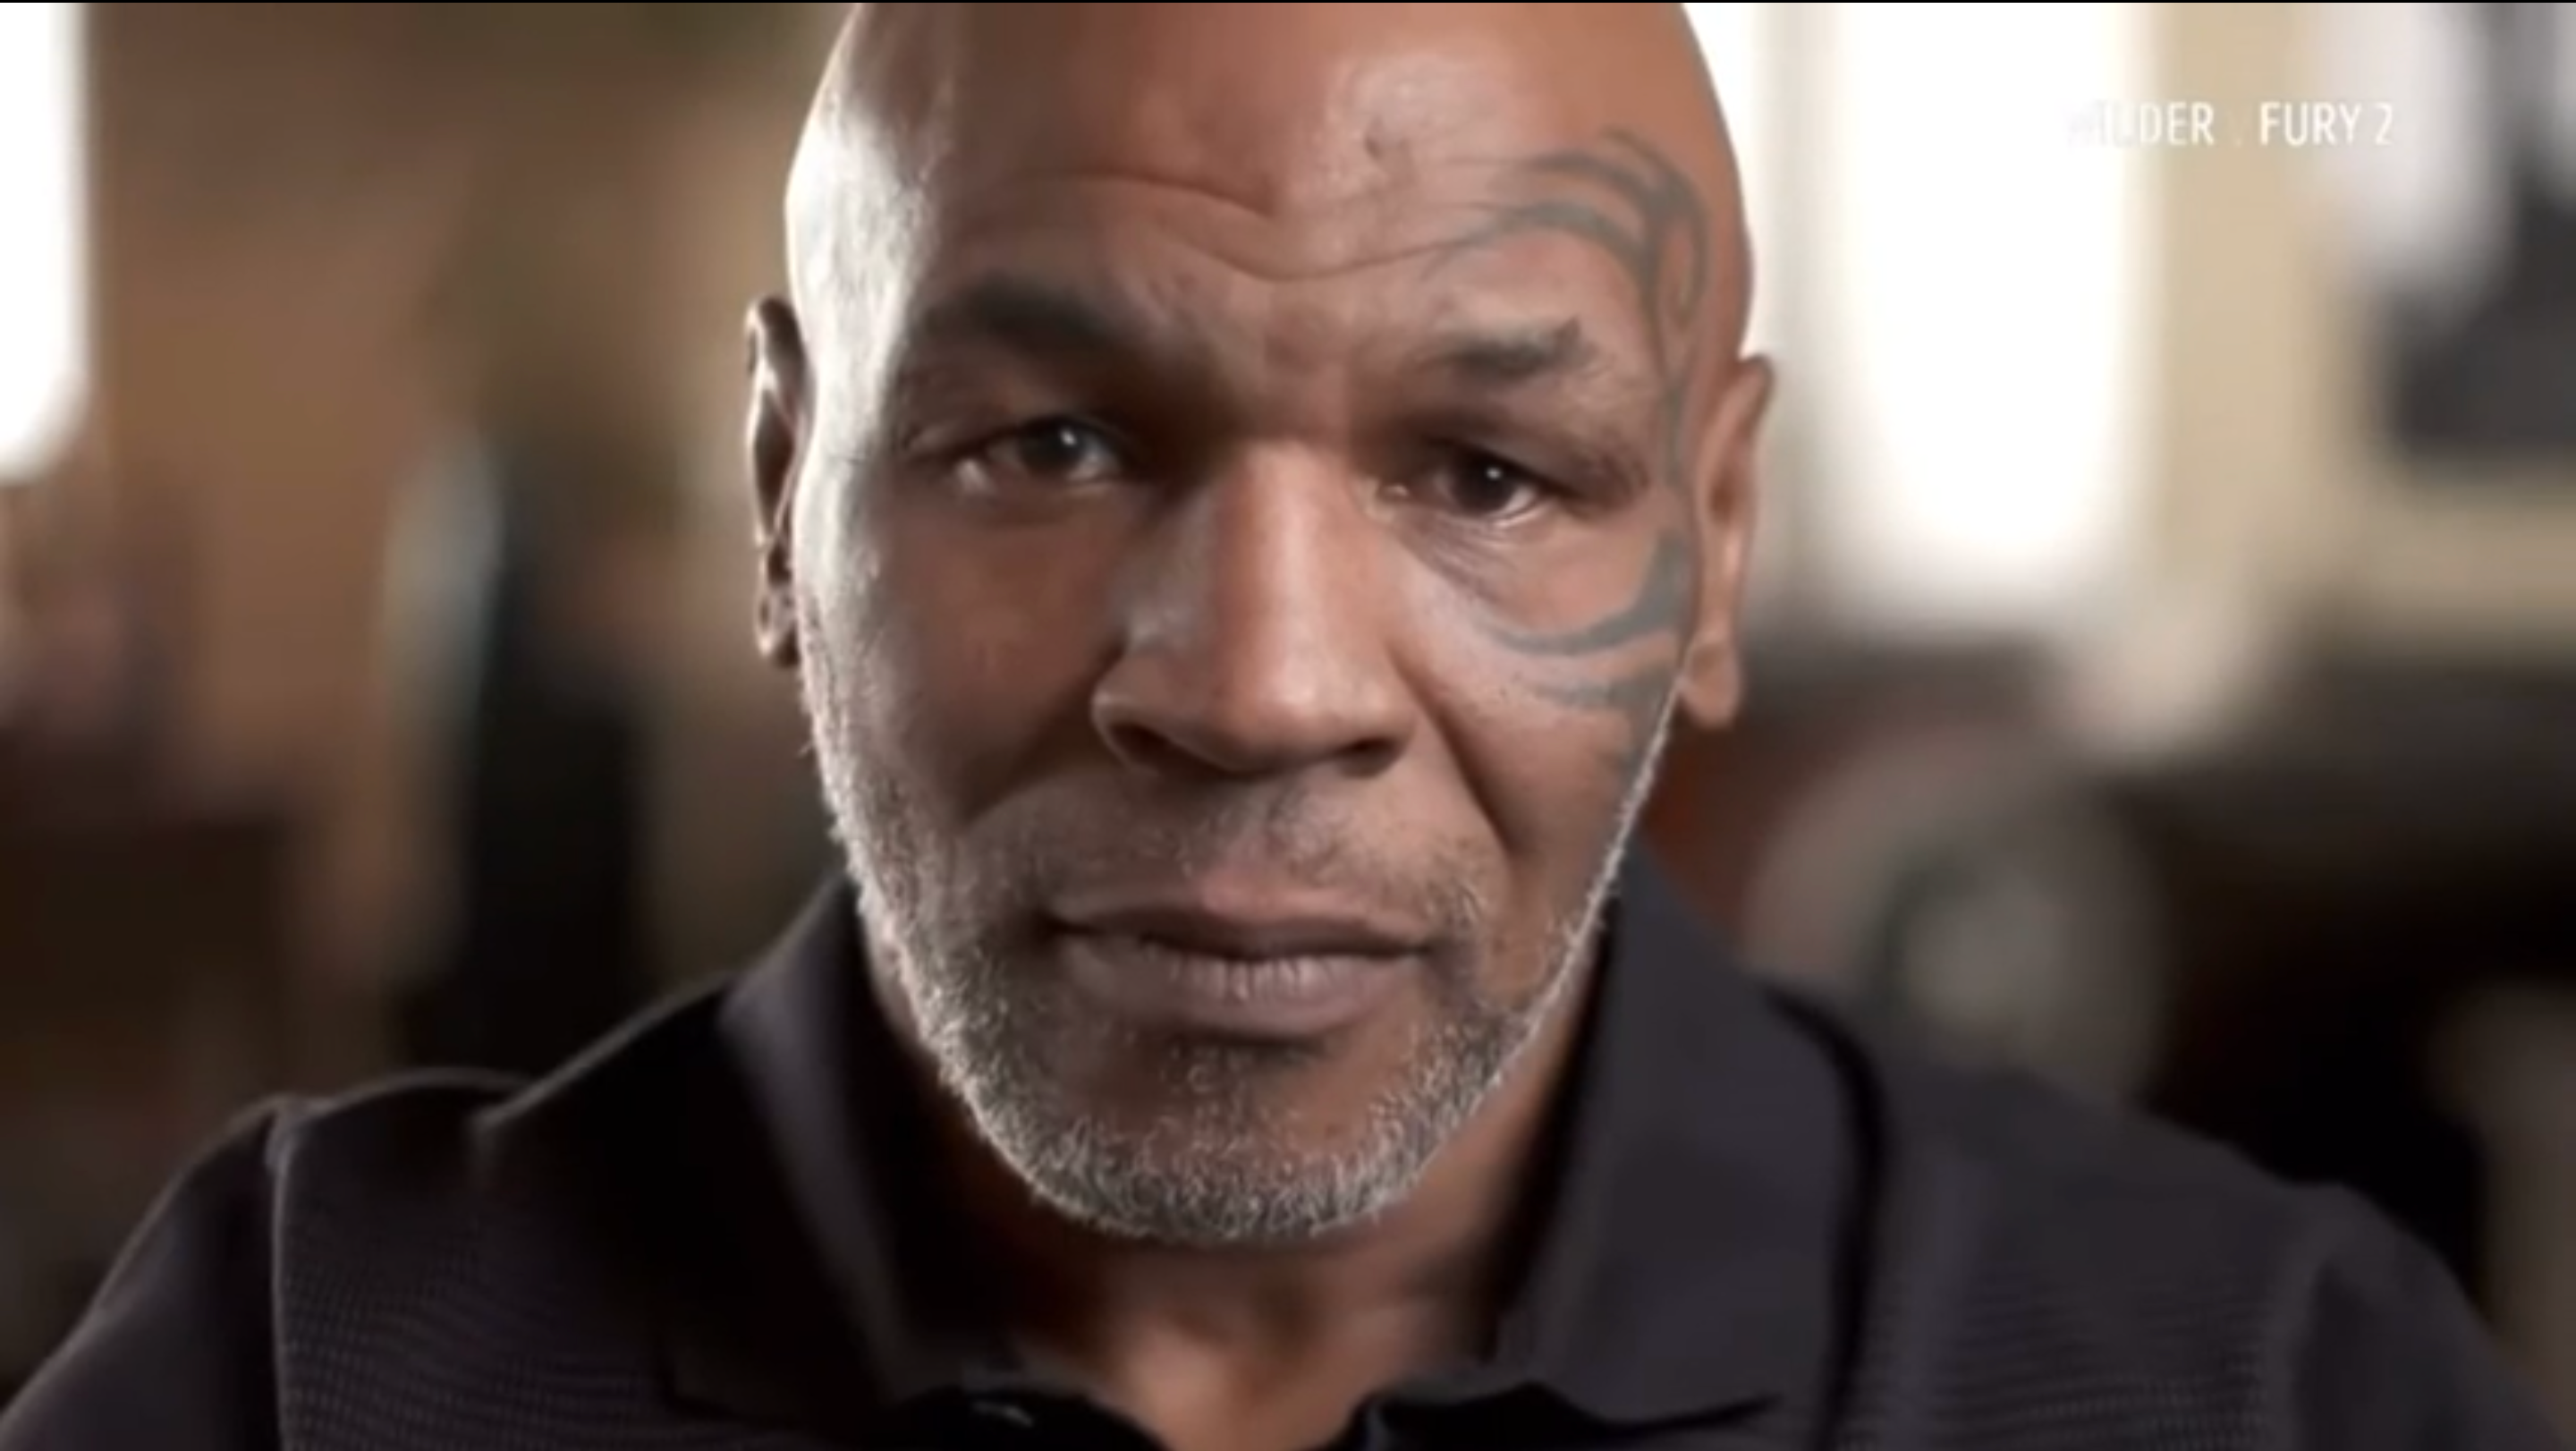 Mike Tyson goes viral again for reacting to Deontay Wilder's prime vs prime claim